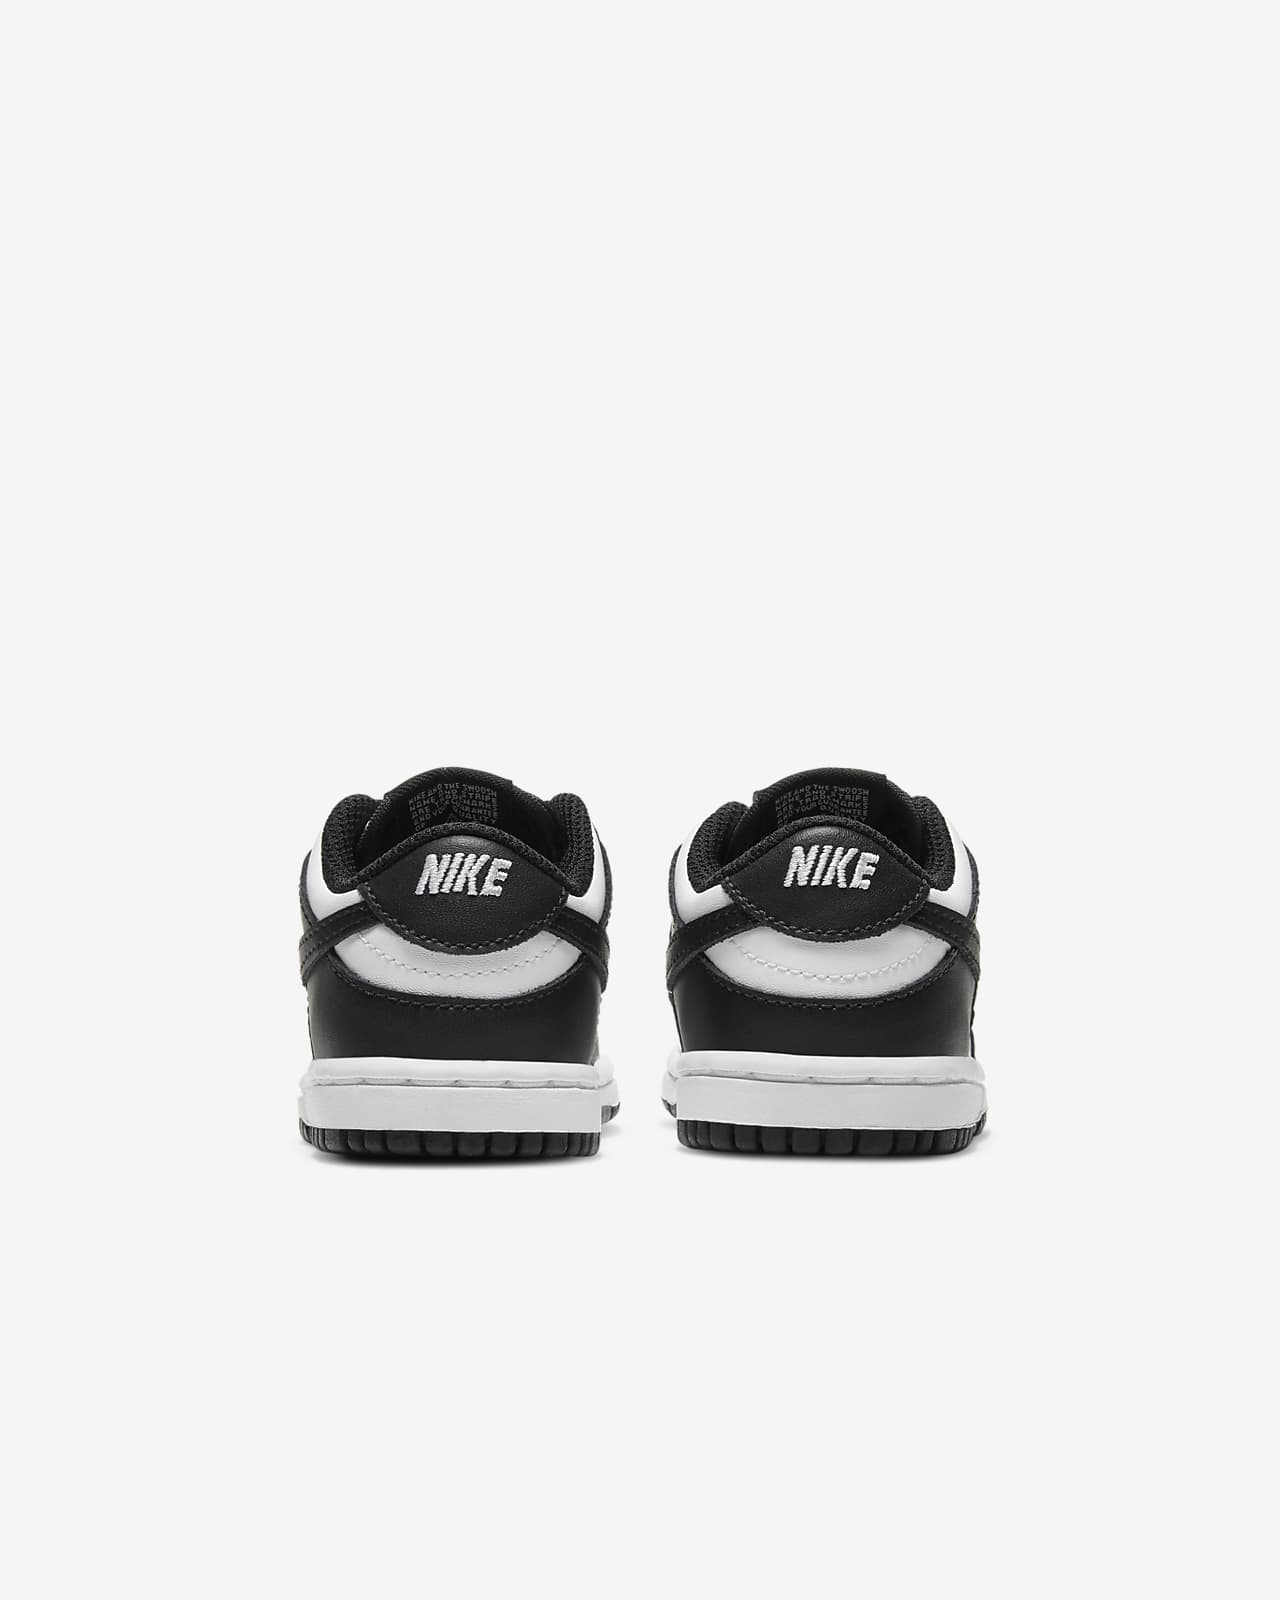 nike dunks black and white low